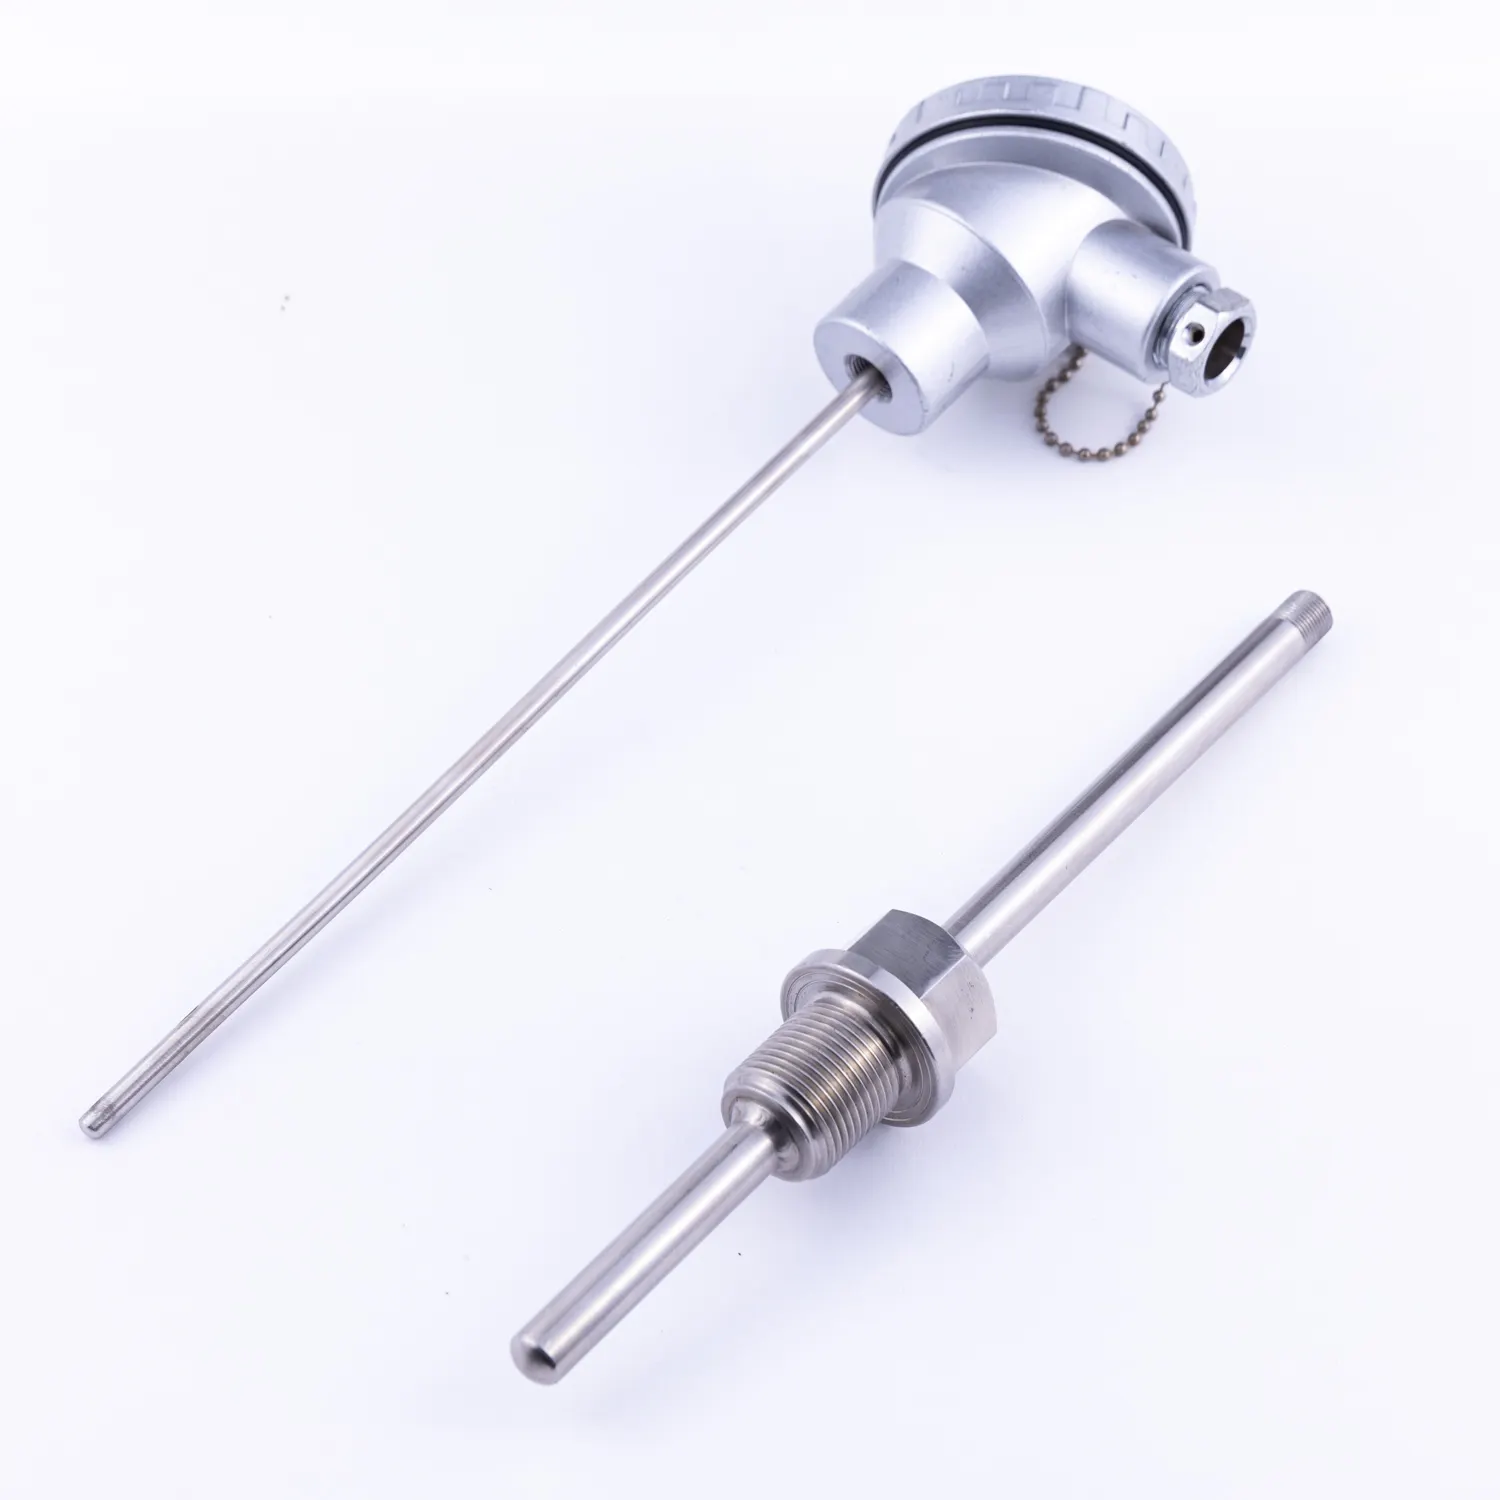 High temperature transmitter K Type Thermocouple Pt100 temperature sensor with low price